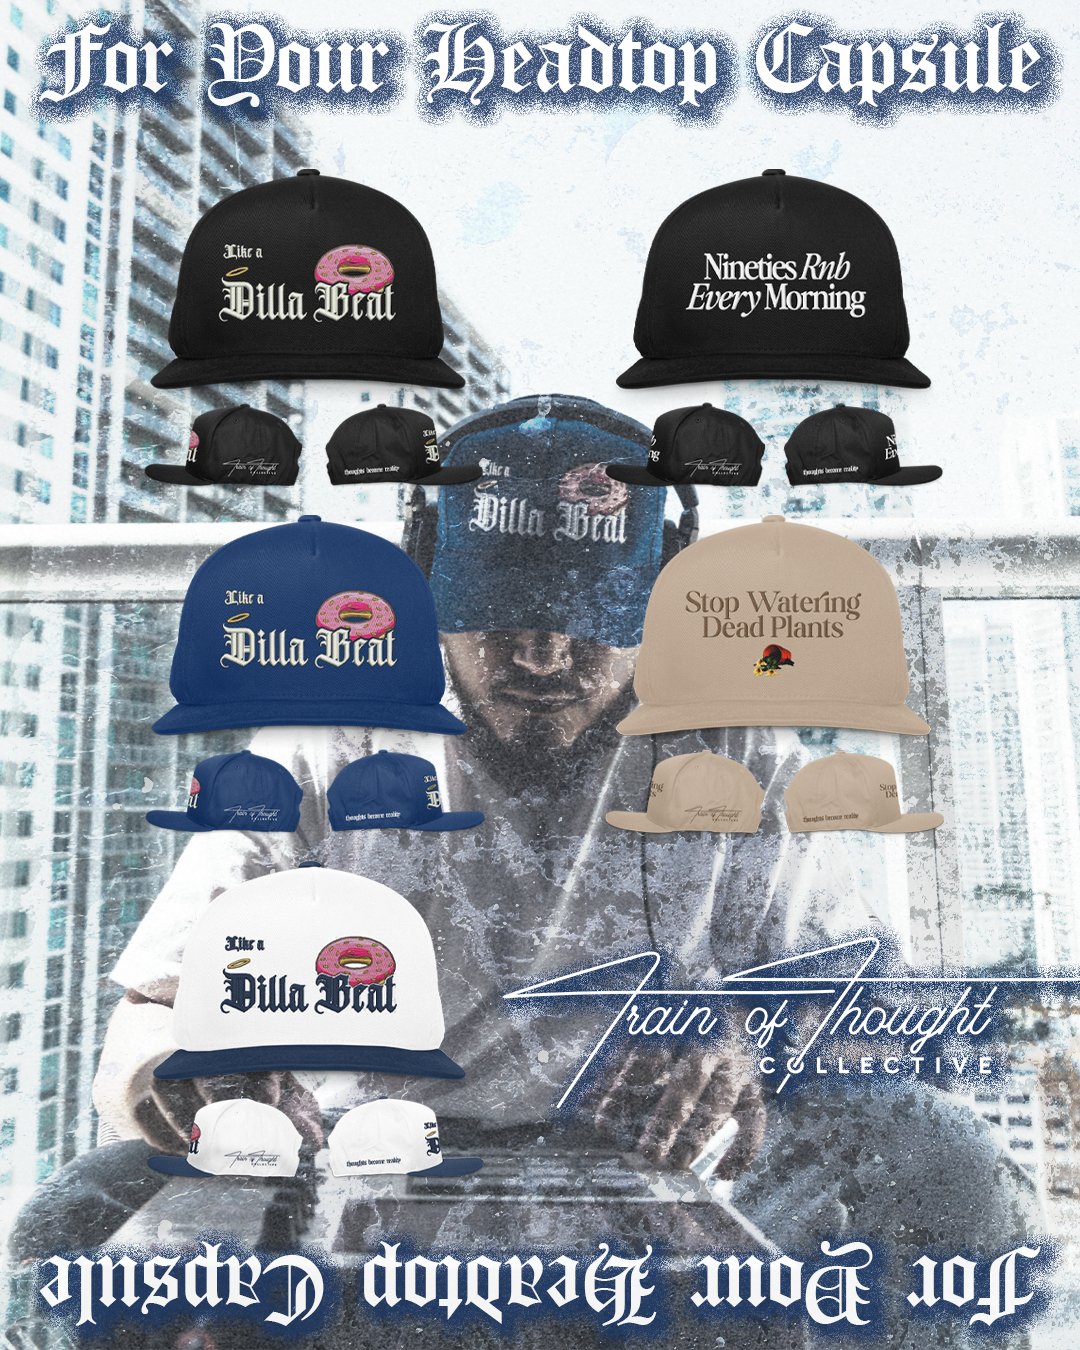 For Your Headtop Capsule - trainofthoughtcollective